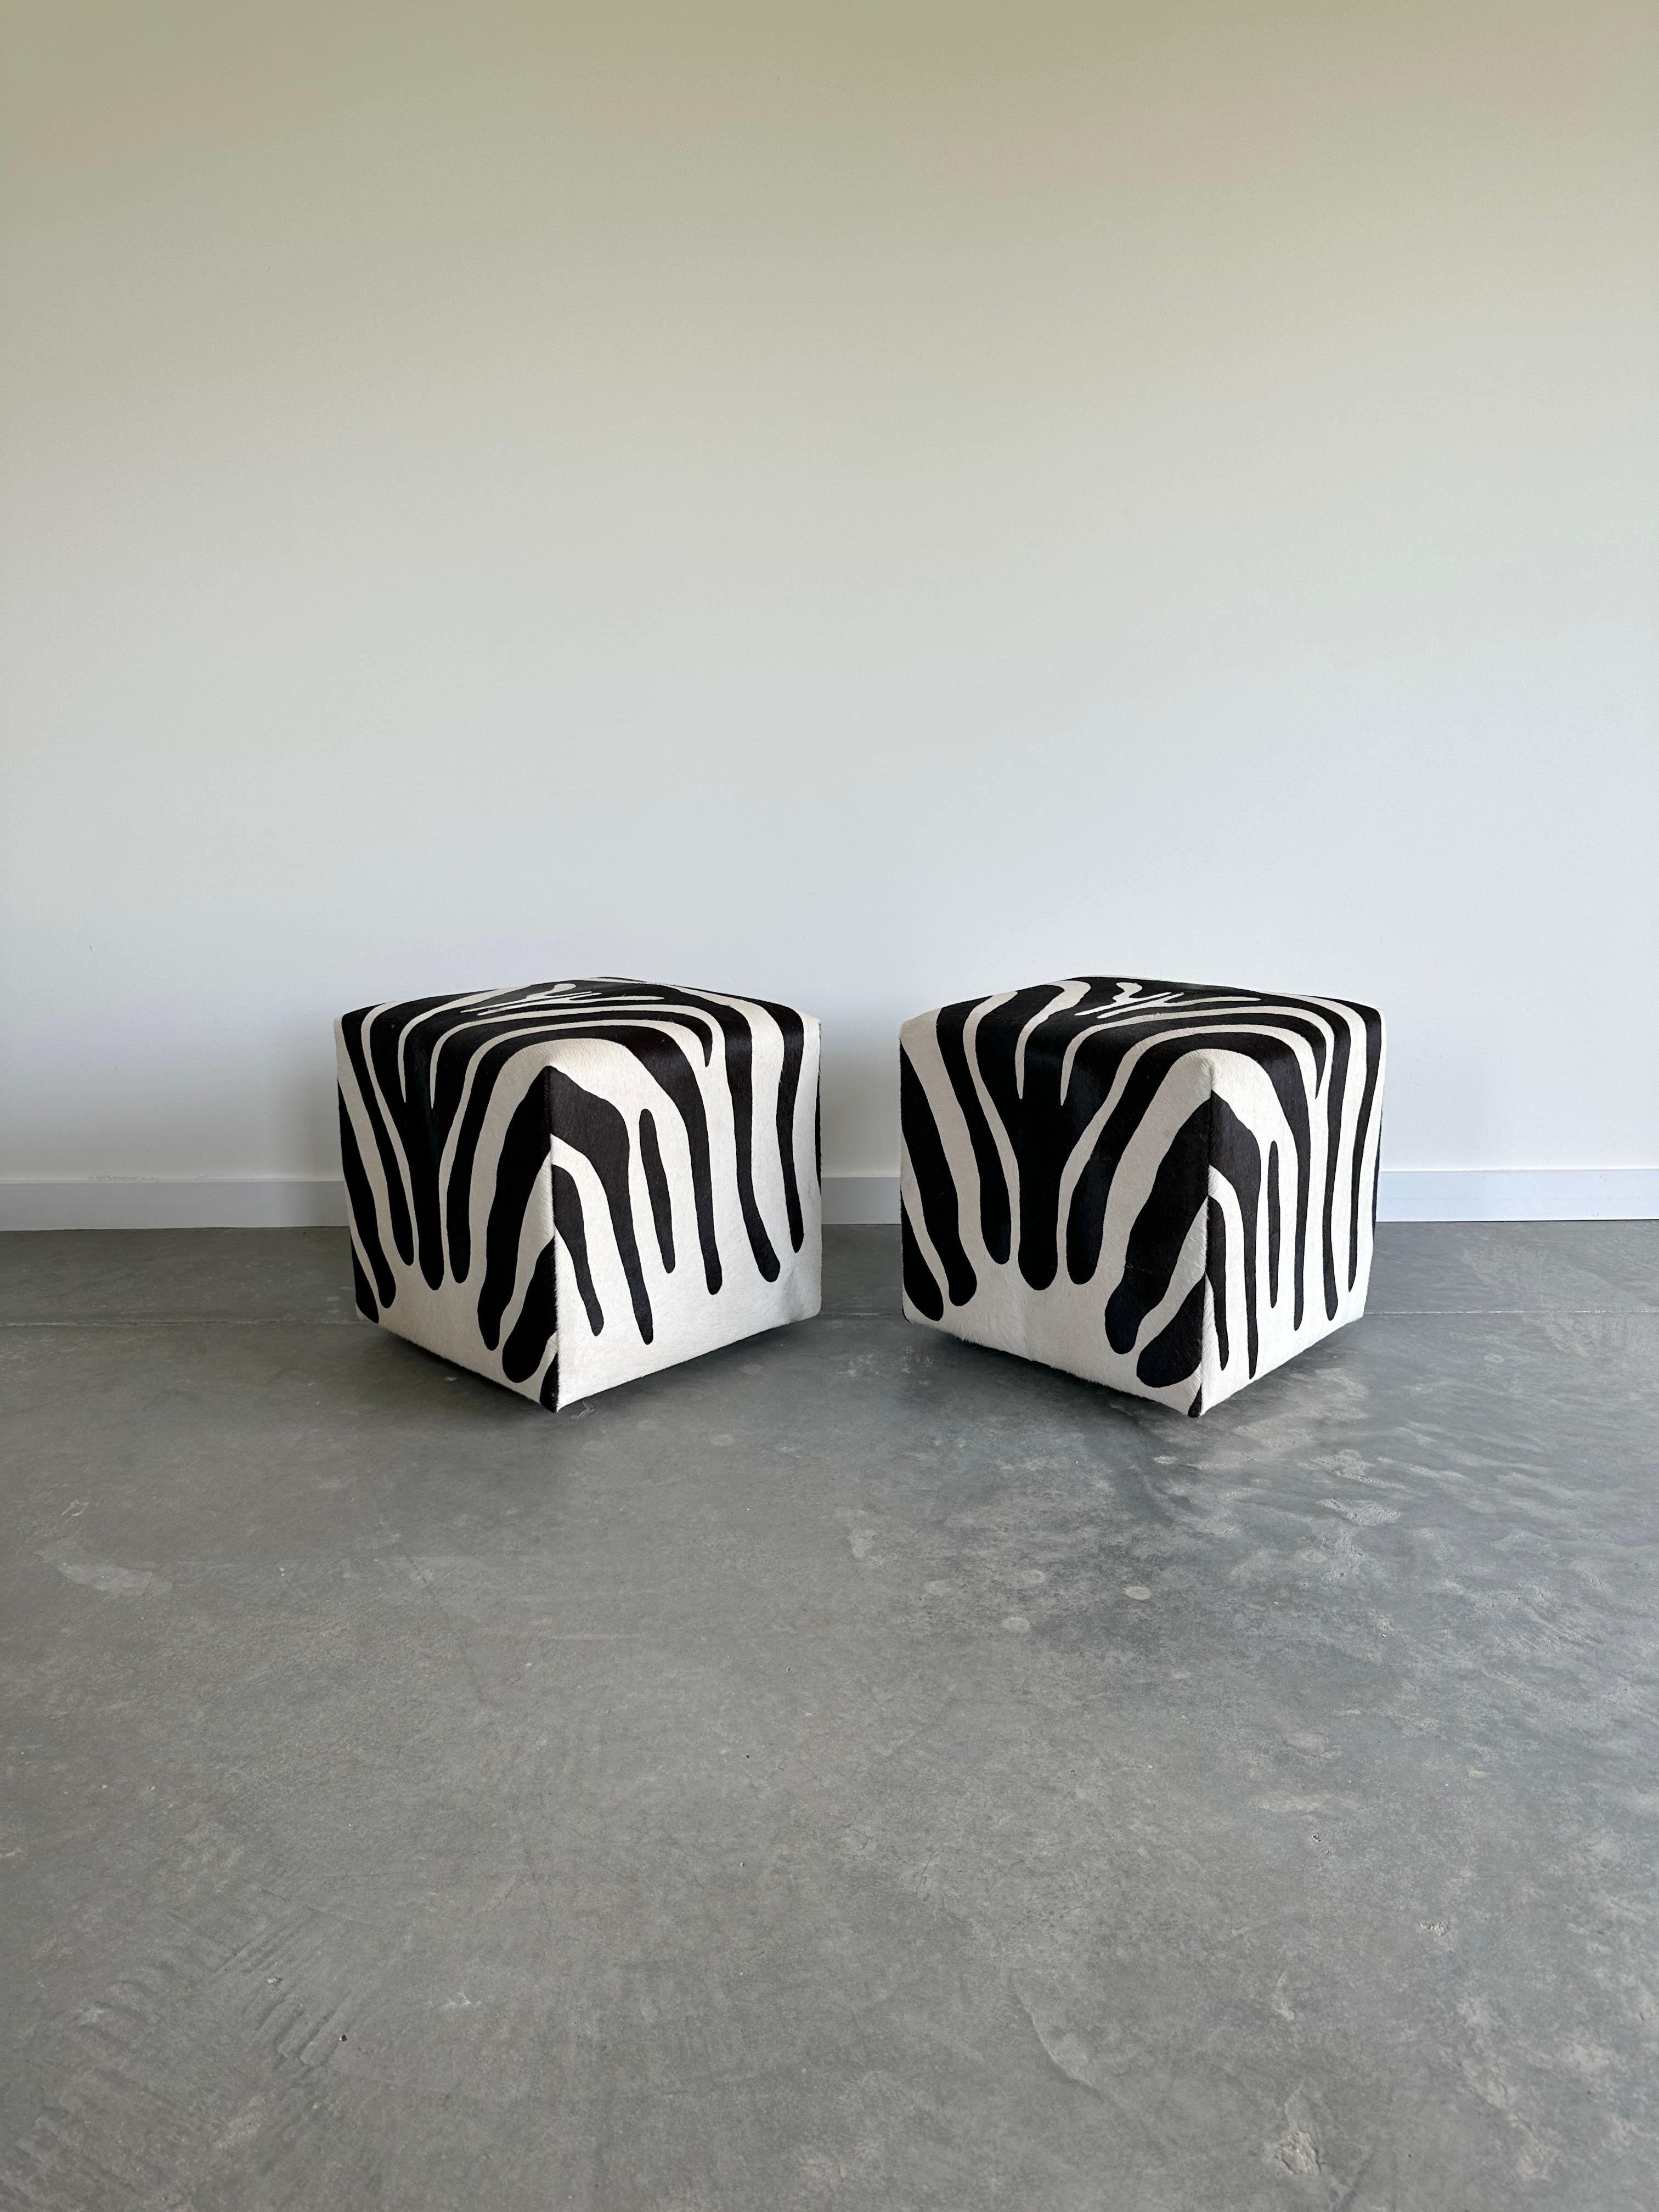 Discontinued style by Design Within Reach. Padded ottoman cube on castors upholstered in zebra design printed on pony hair leather. Essentially unused condition.